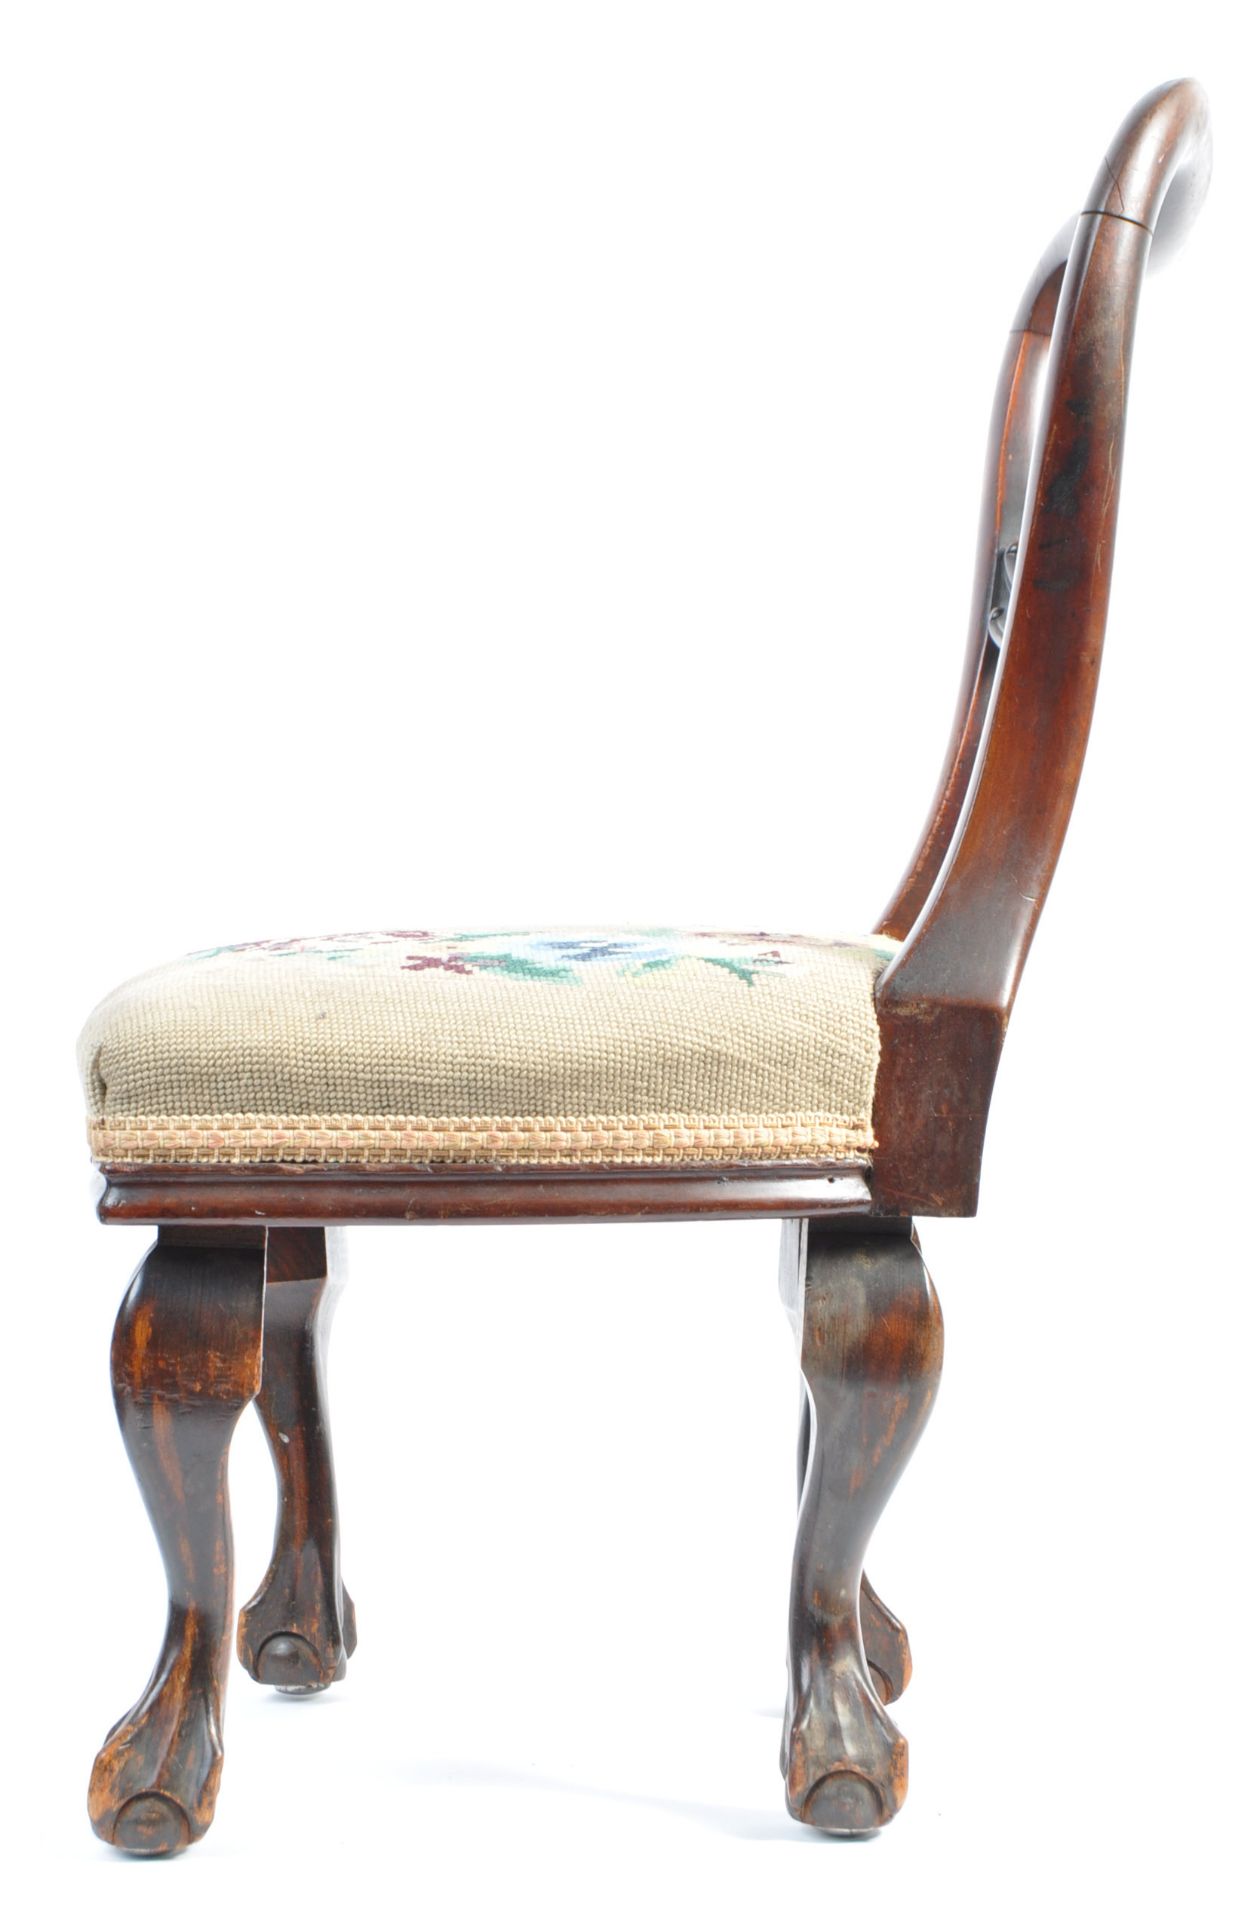 19TH CENTURY VICTORIAN MAHOGANY CHILDS CHAIR - Image 5 of 8